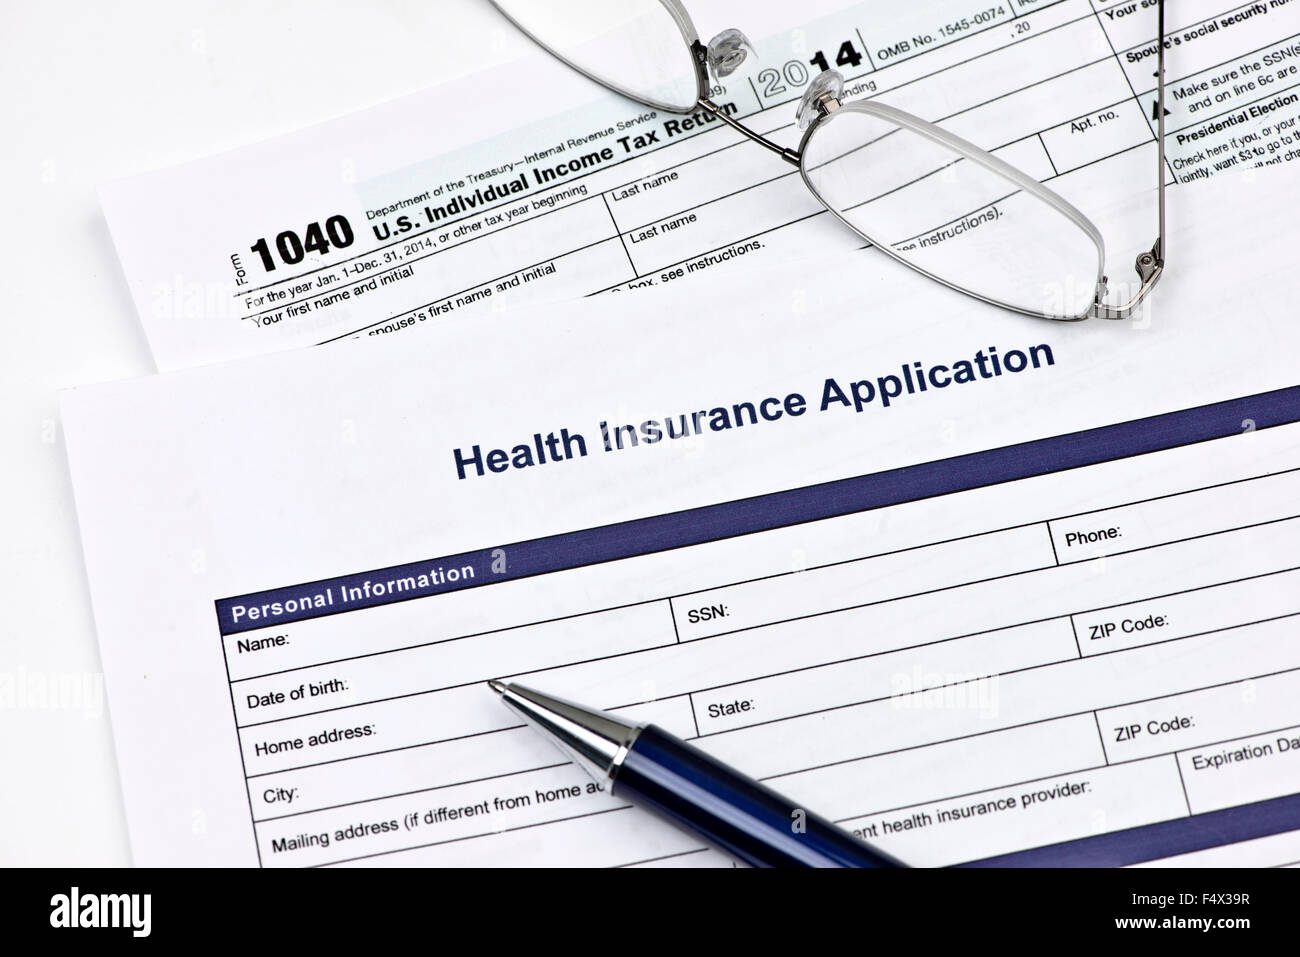 Health insurance application with United States 1040 tax form. Stock Photo